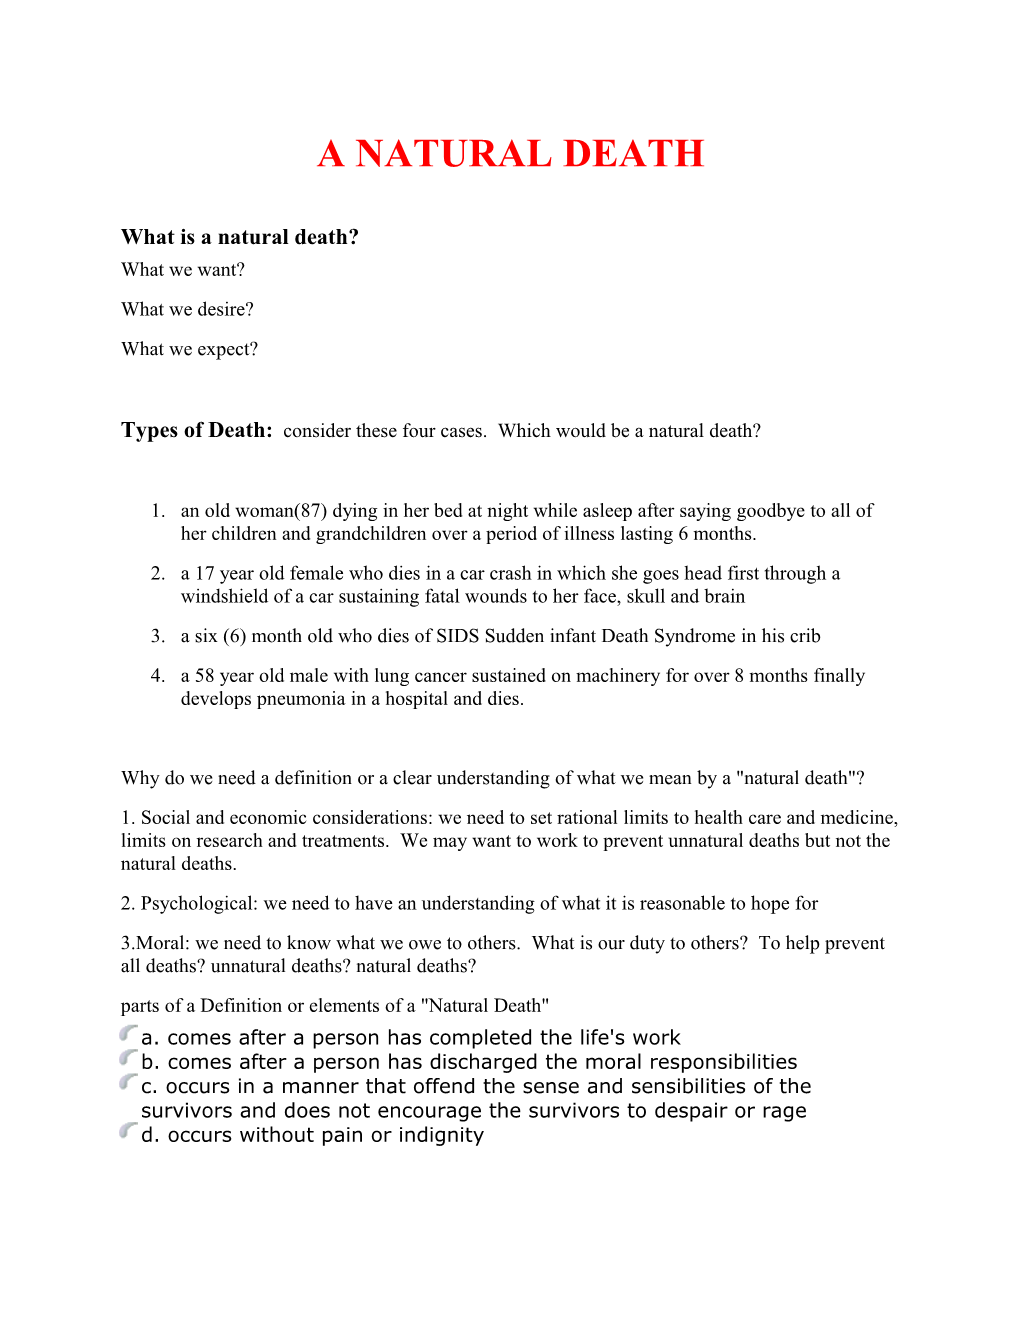 What Is a Natural Death?